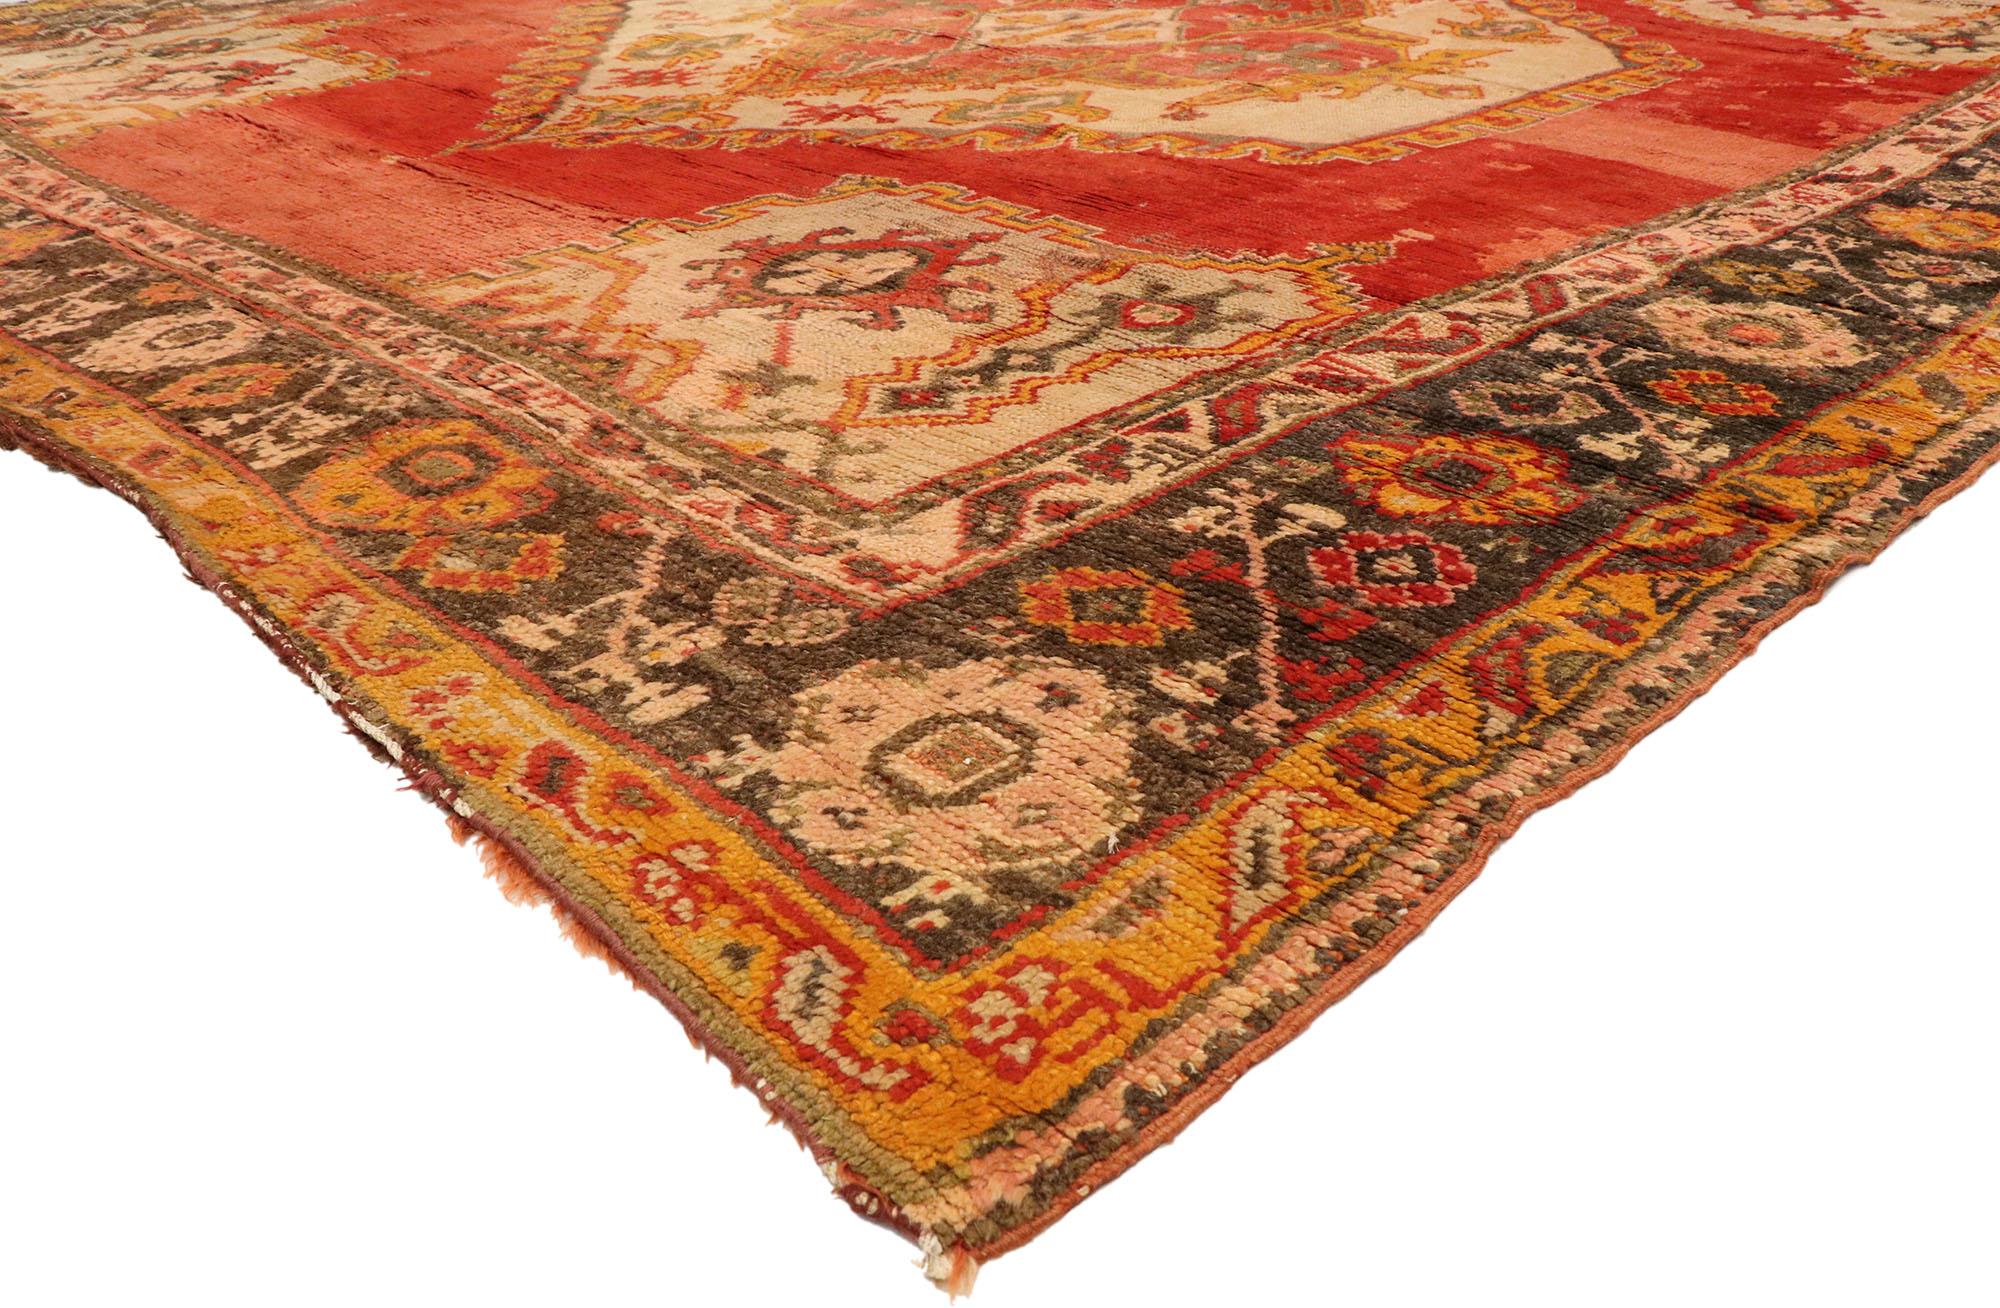 76859 Antique Turkish Oushak Rug 12'01 x 13'05. With its striking appeal and saturated red color palette, this hand-knotted wool antique Turkish Oushak rug appears like a sumptuous Italian velvet, recalling the rich and luxurious design furnishings